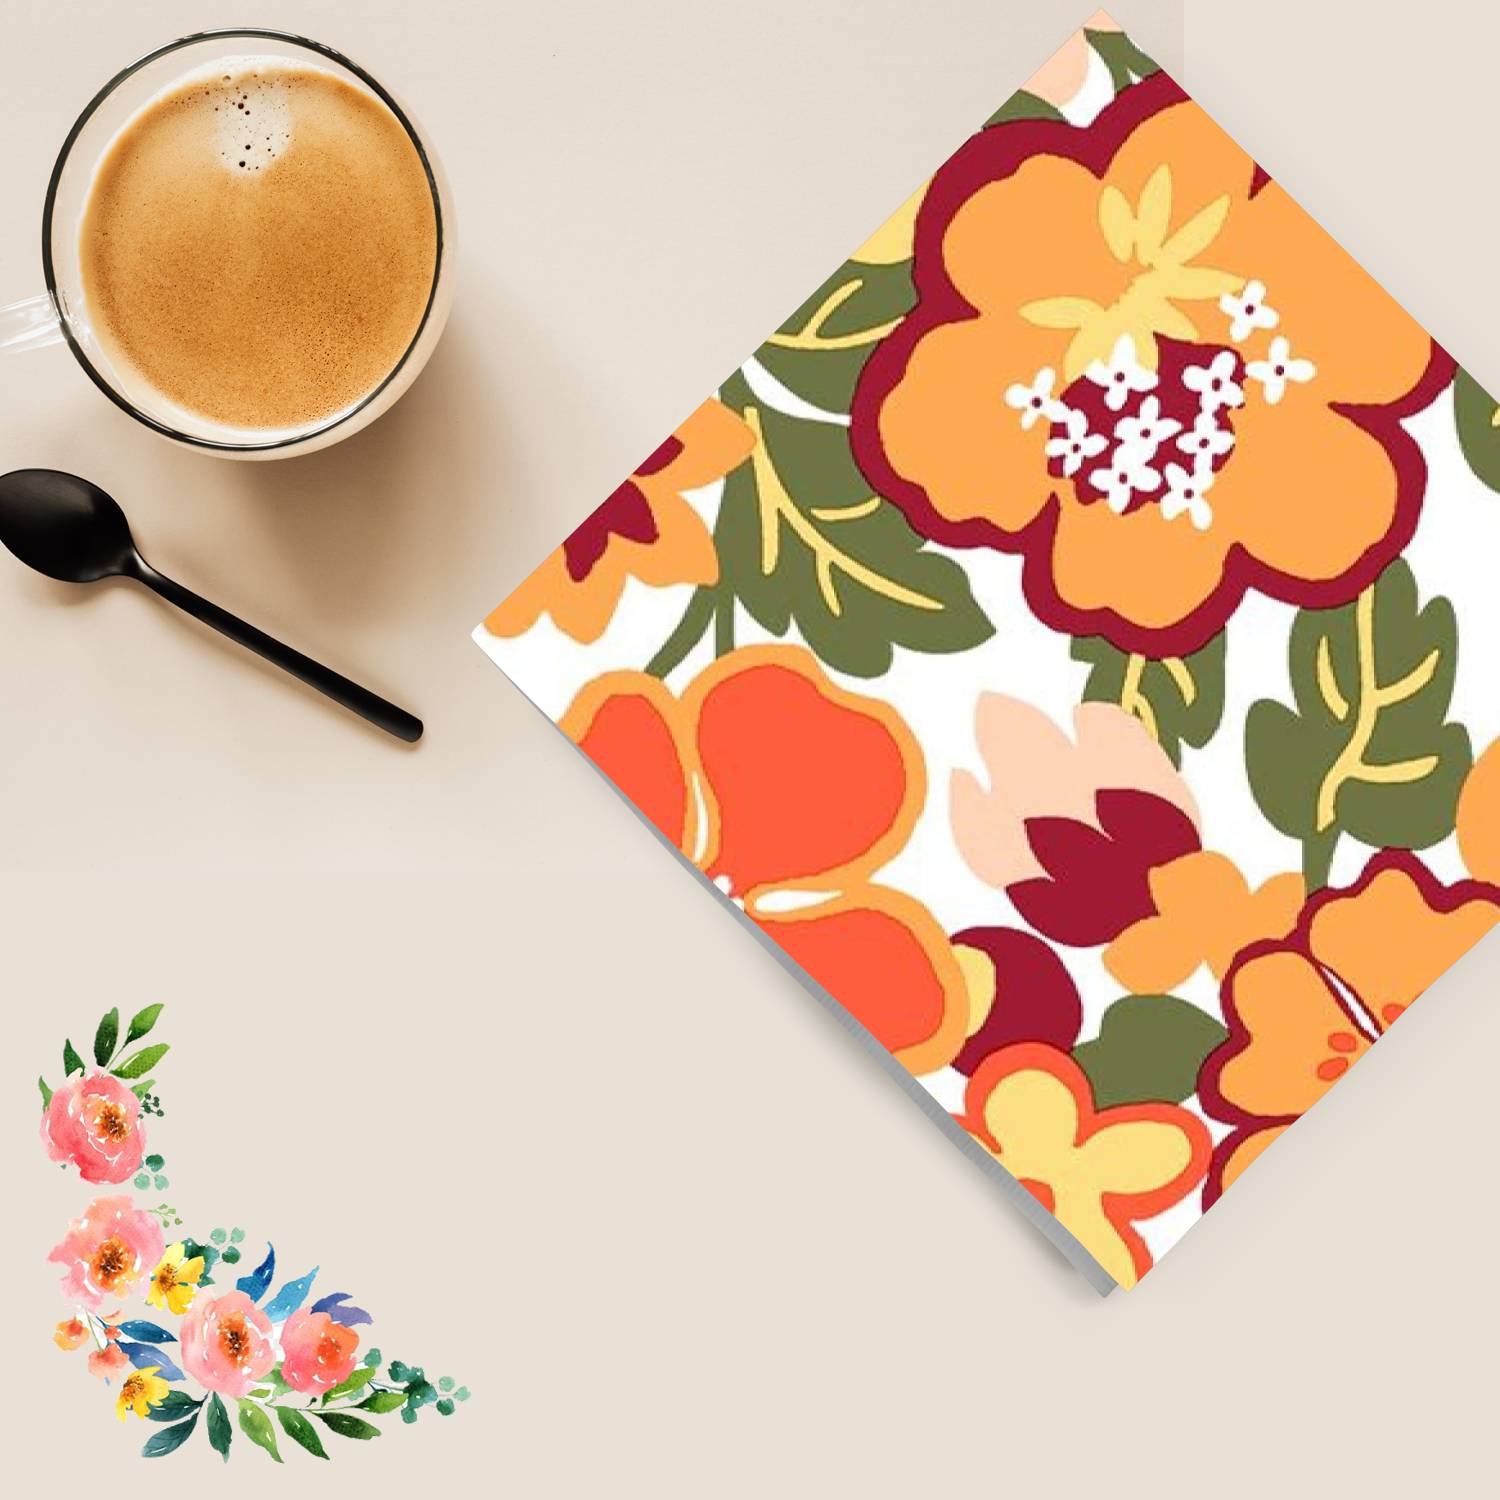 Scattered Blossoms Disposable Lunch Paper Napkins 20 Ct Tablesettings Nicole Fantini Collection   